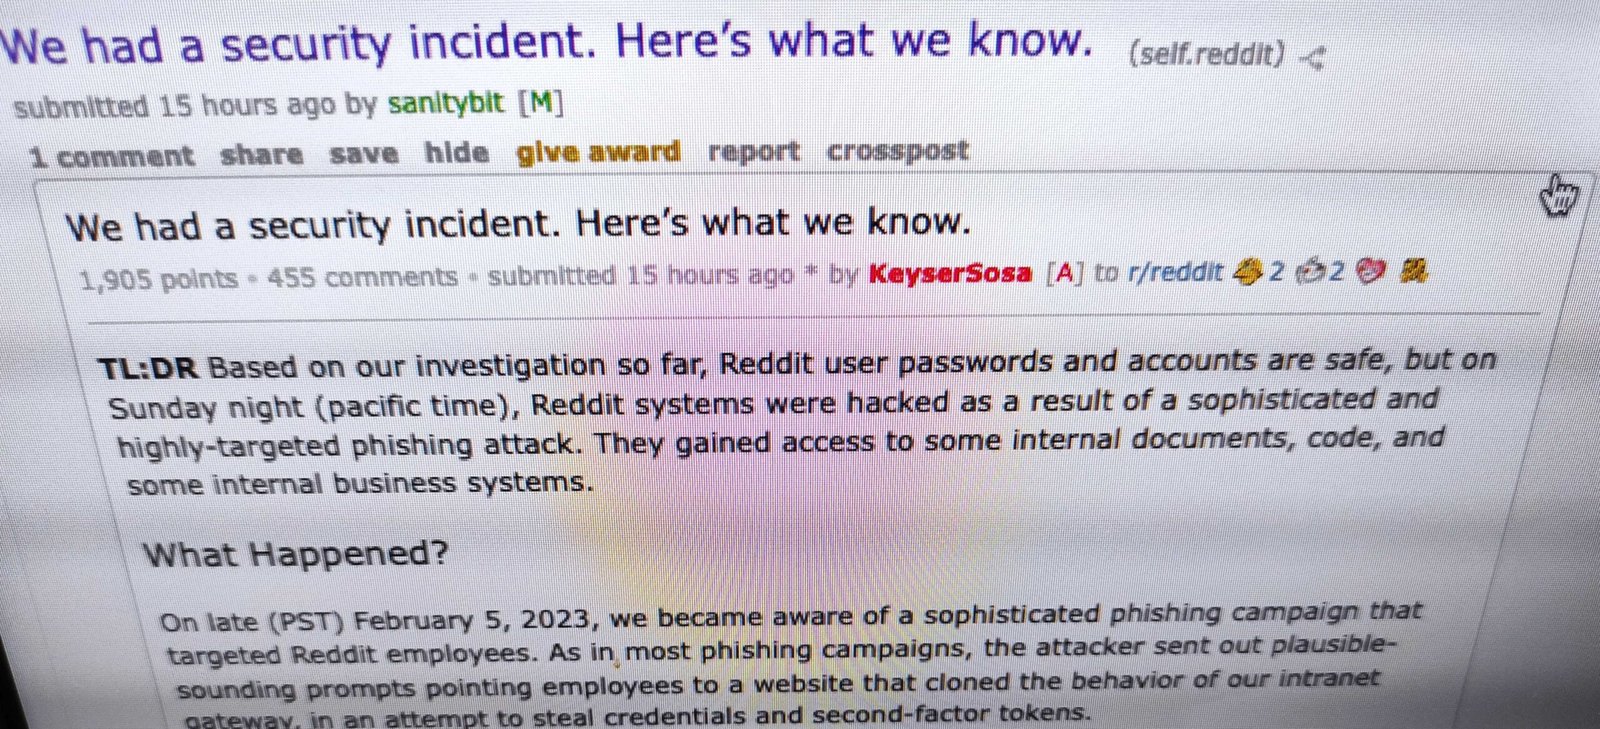 Ransomware Gang Takes Credit for February Reddit Hack – Source: www.securityweek.com